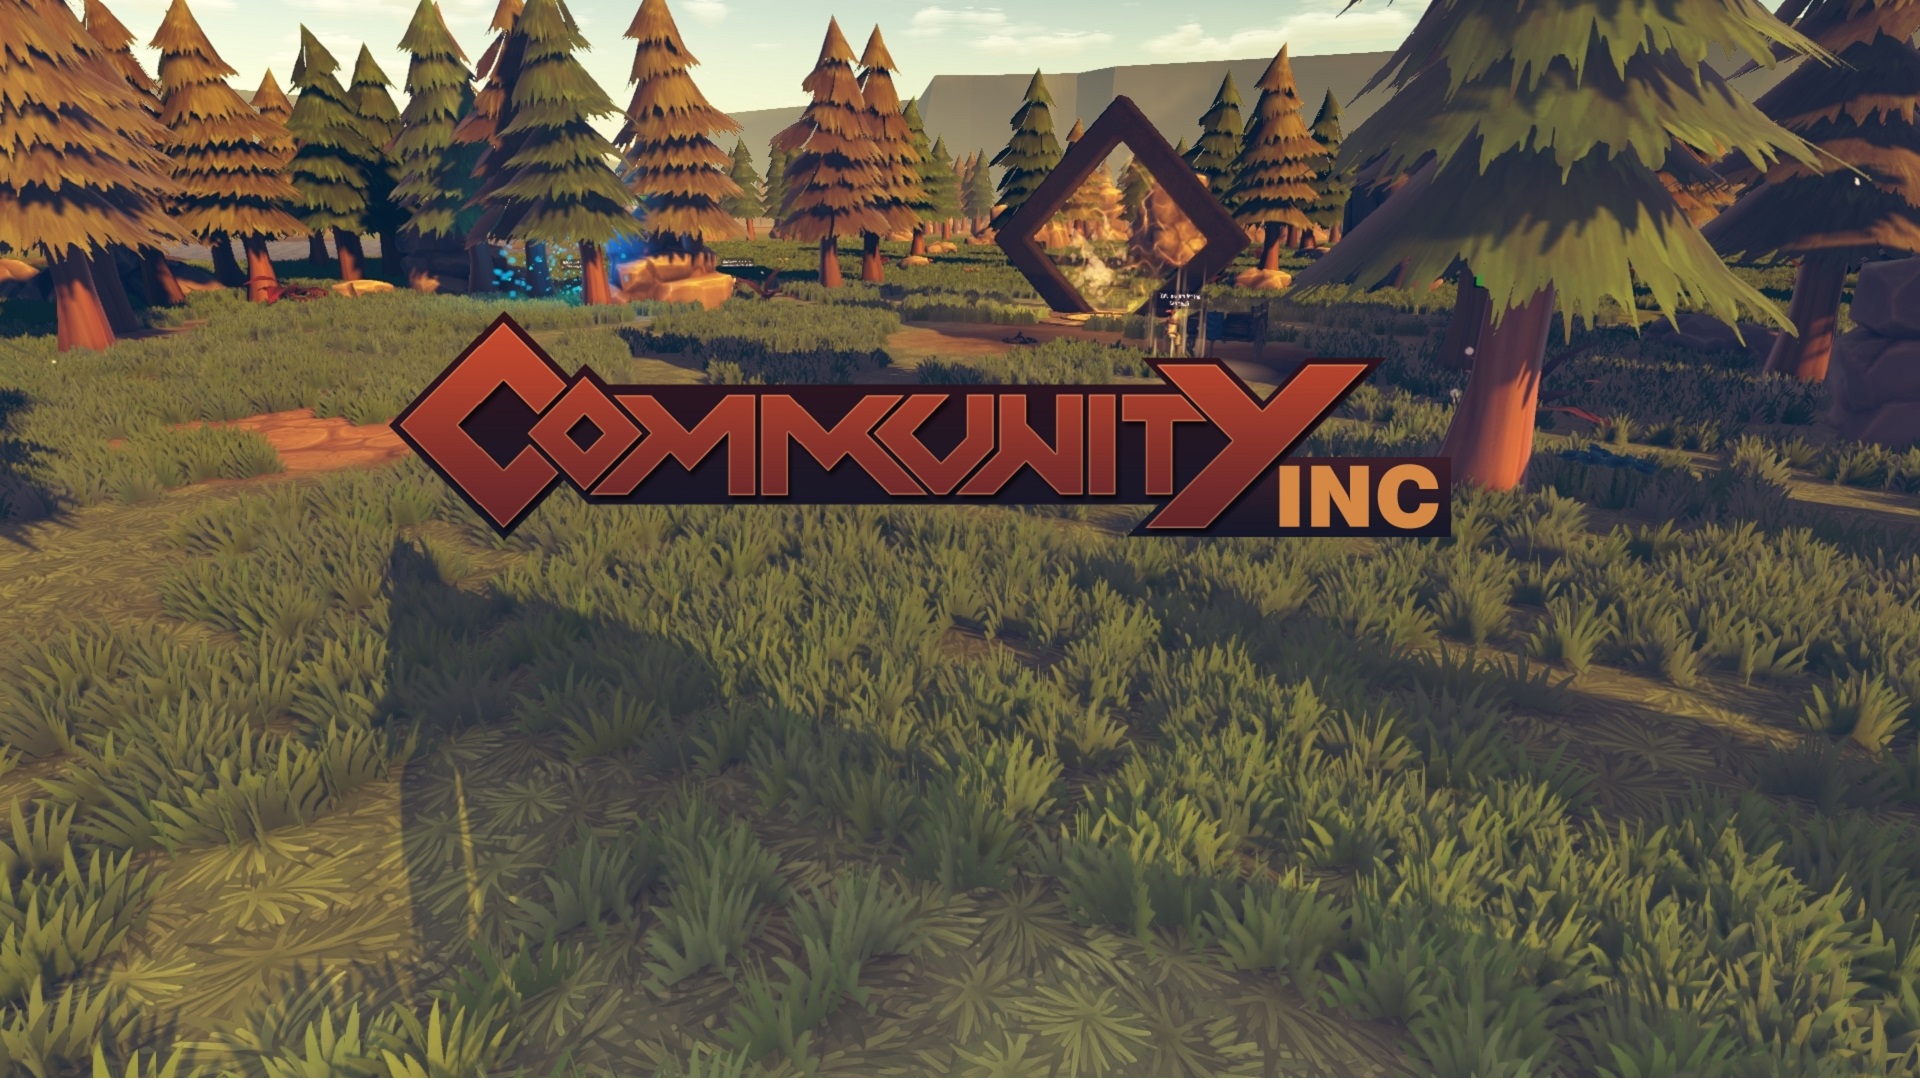 [PC] Community Inc (Simulation|Indie|Strategy|2017)